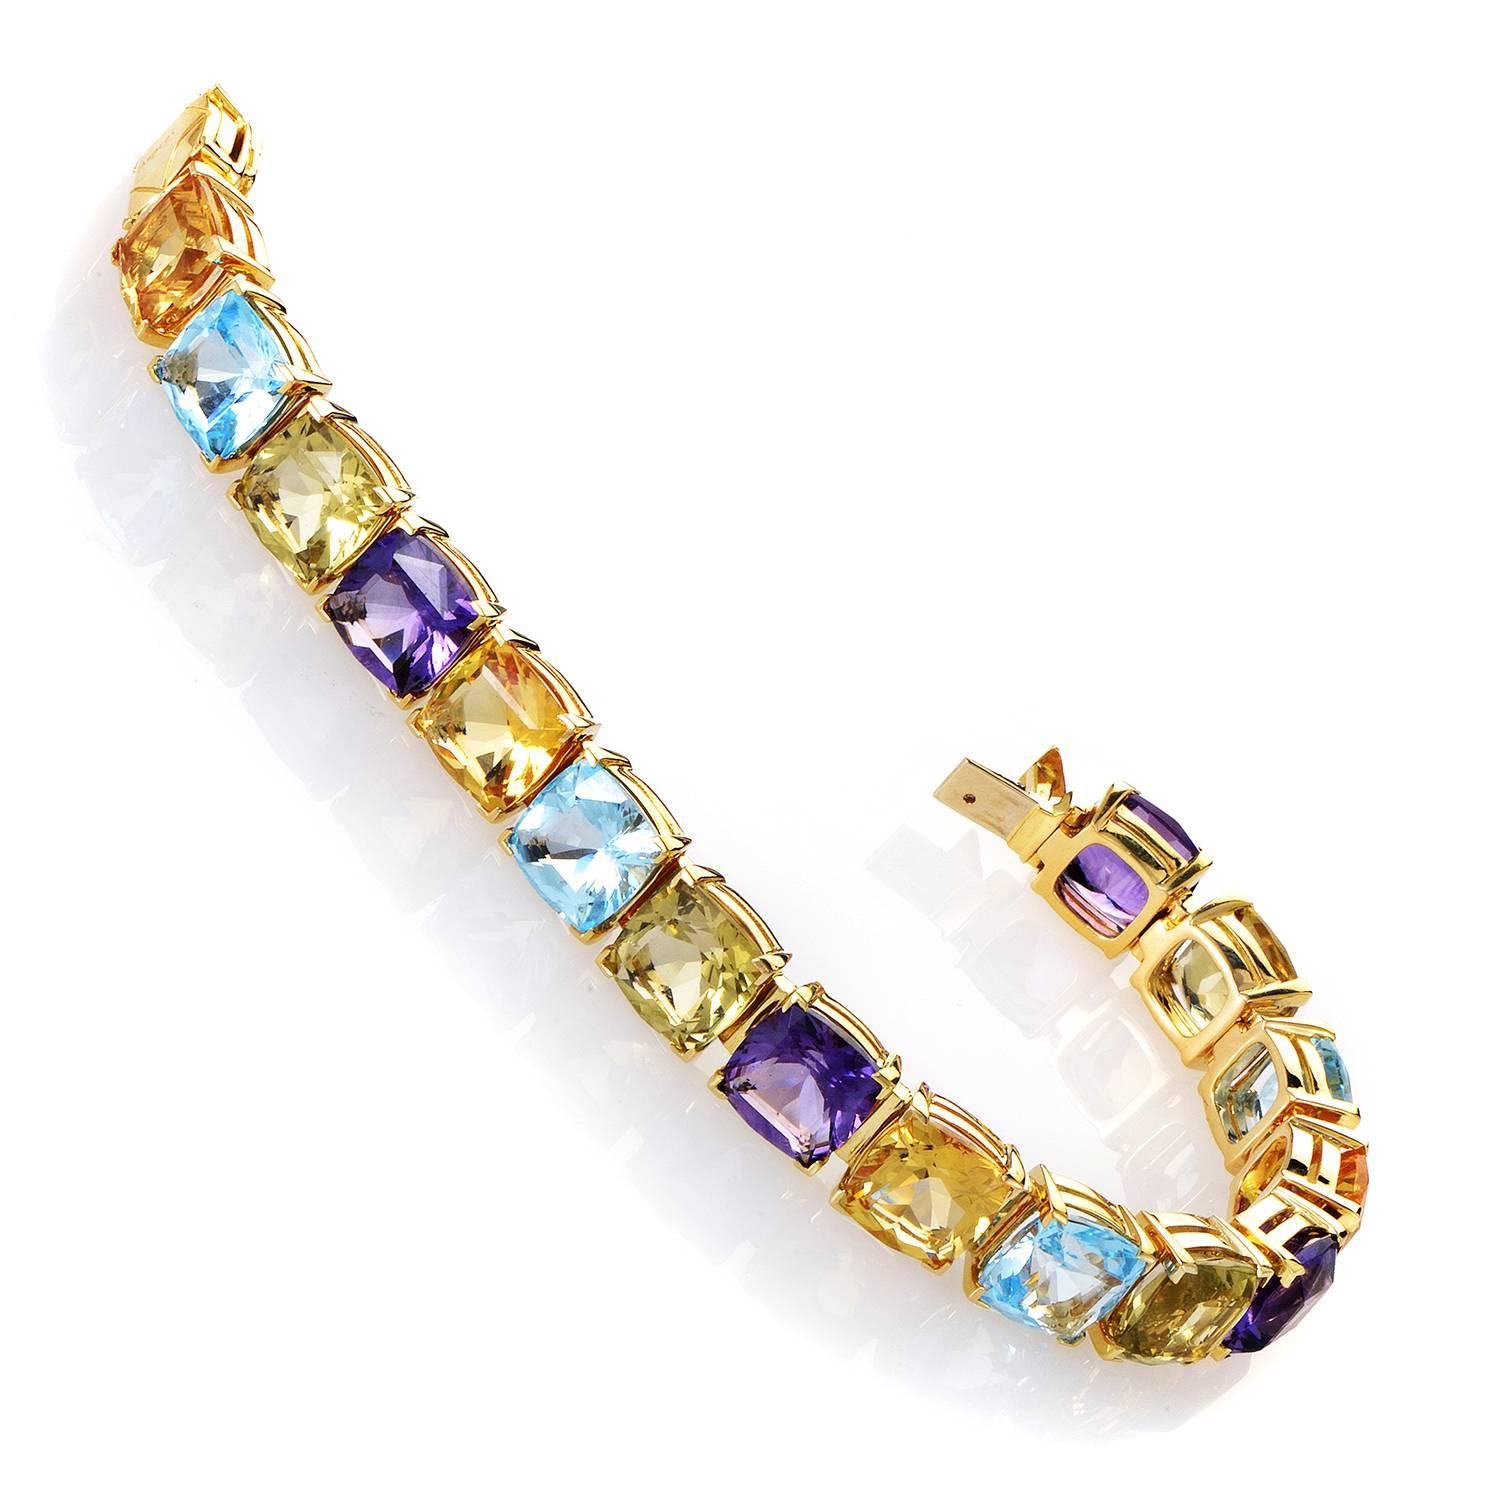 A kaleidoscopic spectacle from Asprey! A circle of shimmering stones is on display in evenly distributed settings of Citrine, Lemon Quartz, Amethyst and Topaz. This perpetual merry go 'round of colors is cinched together by the integral spin of 18K